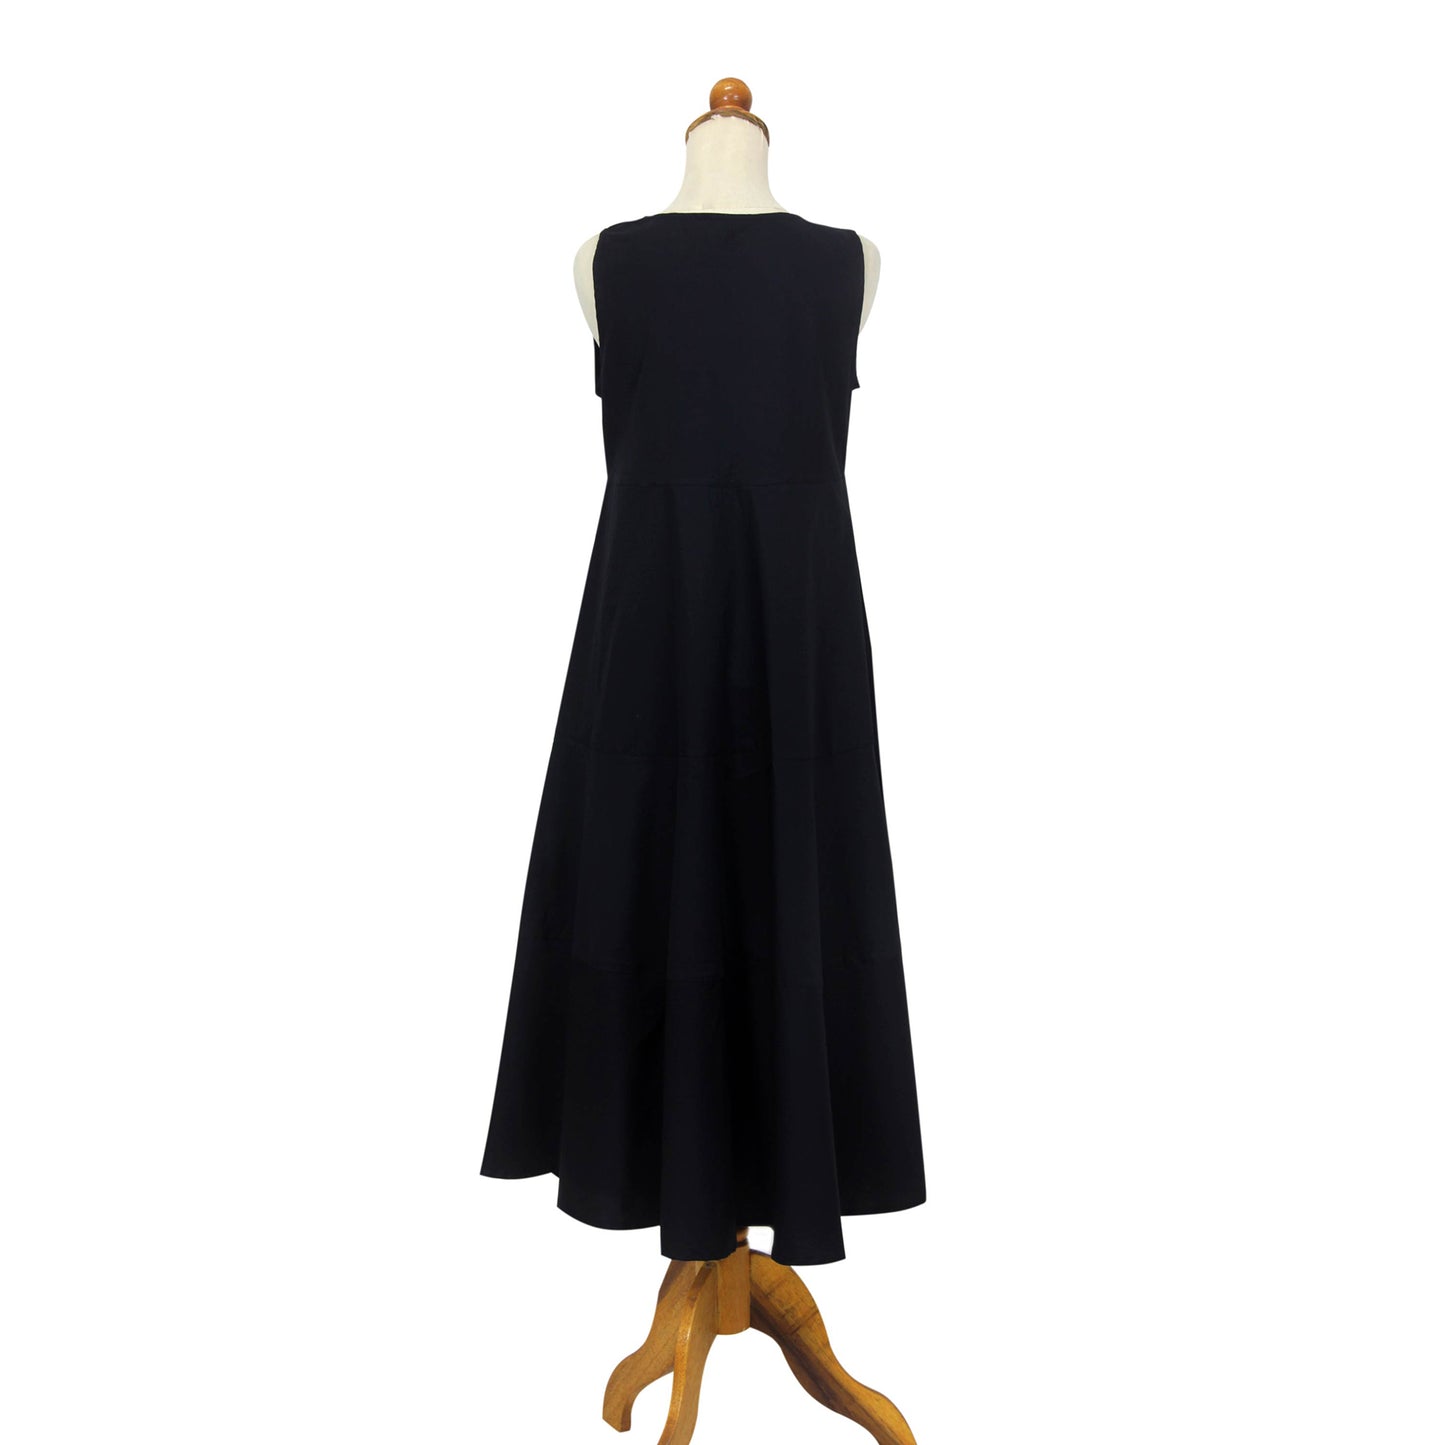 Cool in Black Cotton Dress